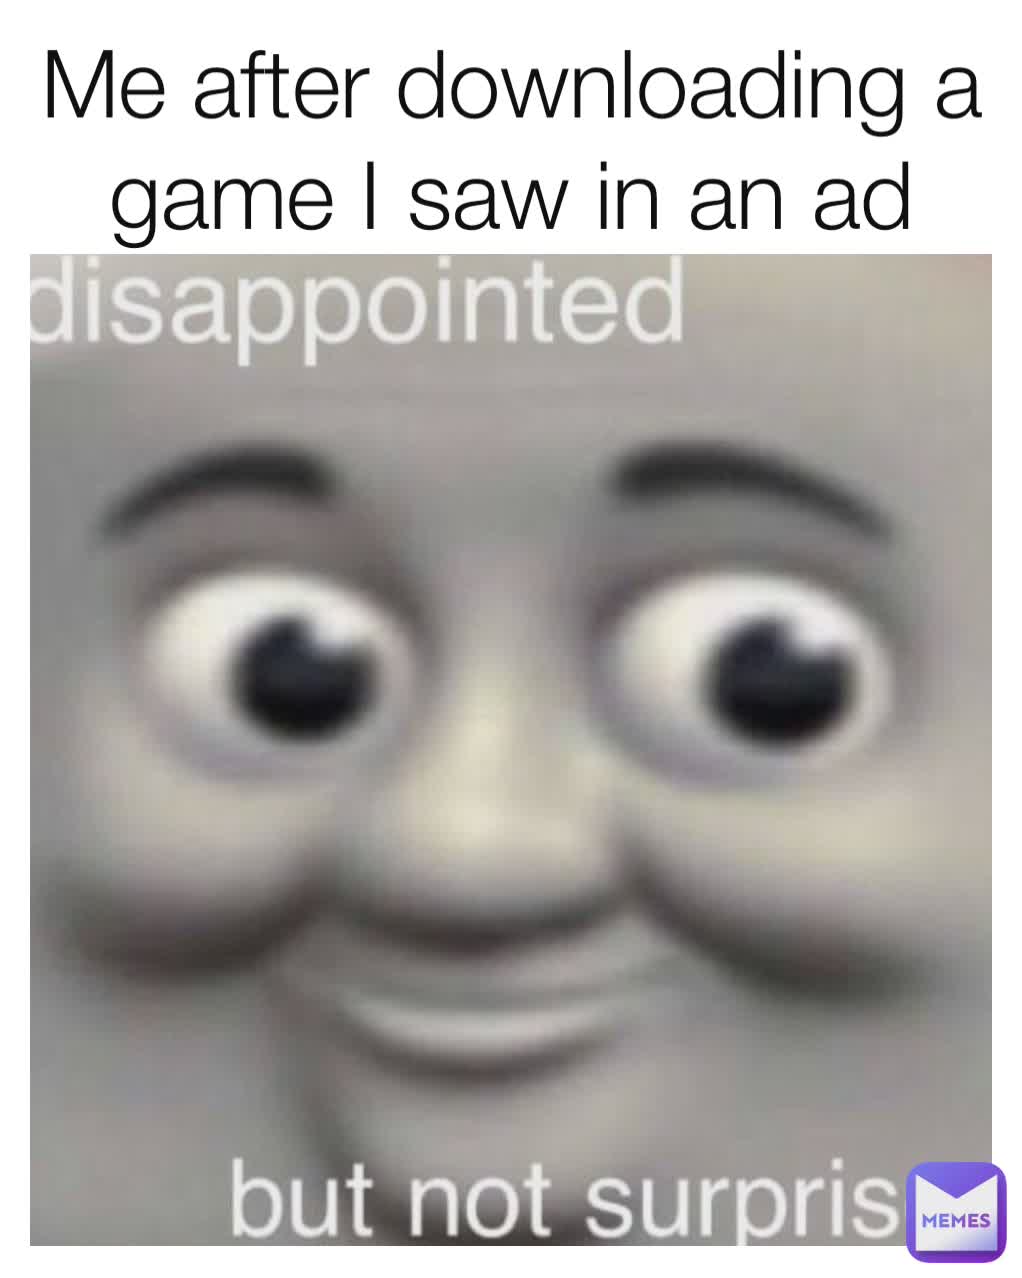 Me after downloading a game I saw in an ad